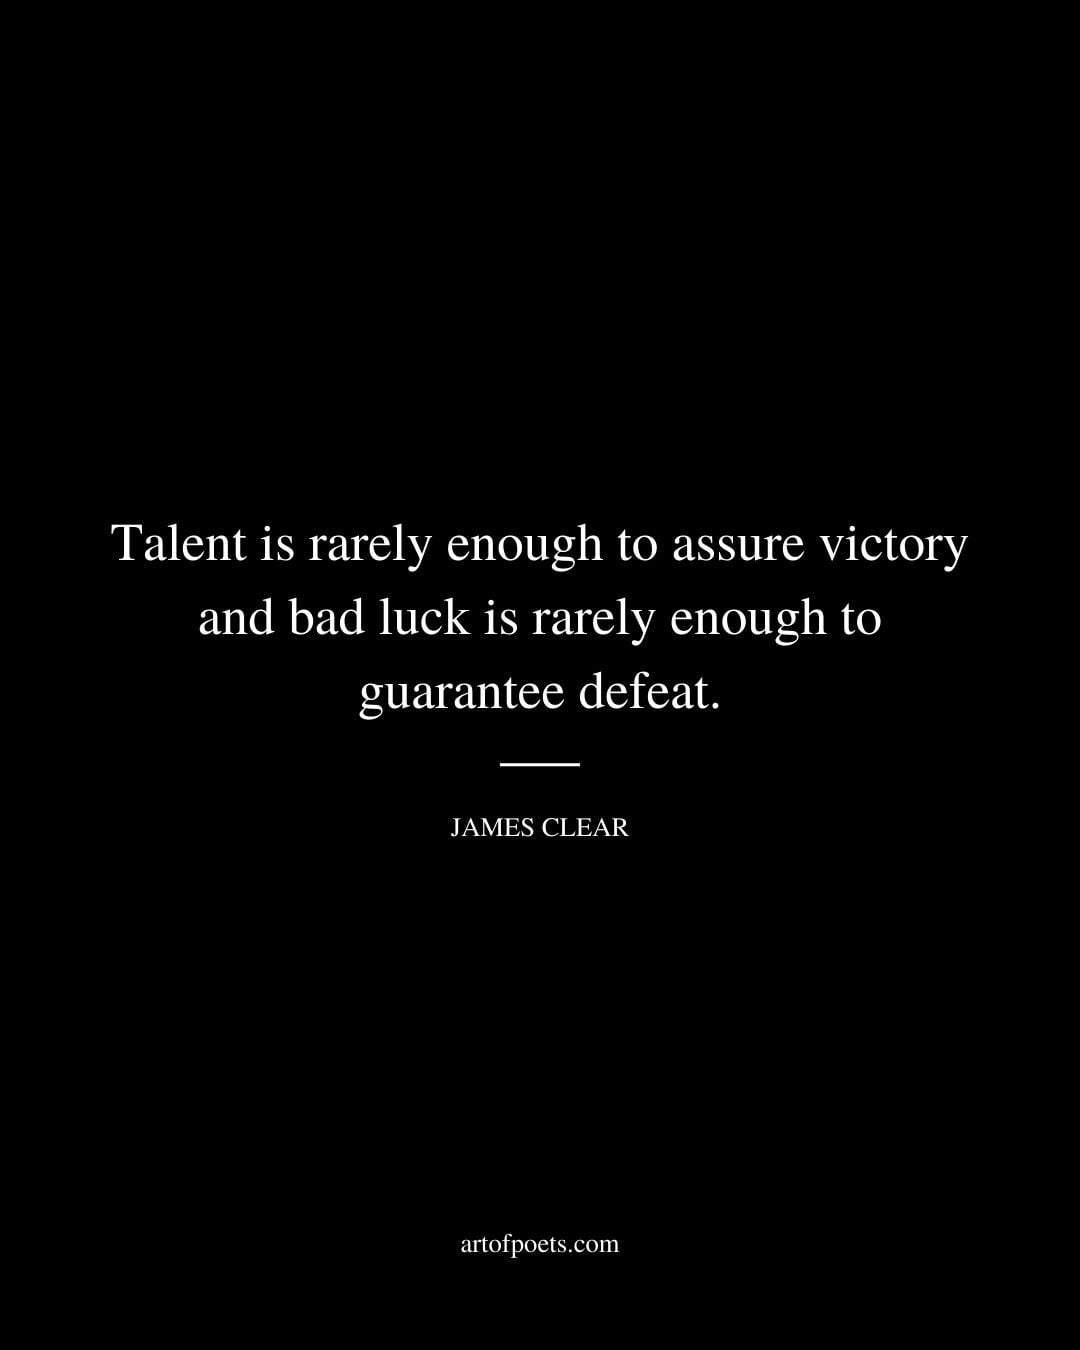 Talent is rarely enough to assure victory and bad luck is rarely enough to guarantee defeat